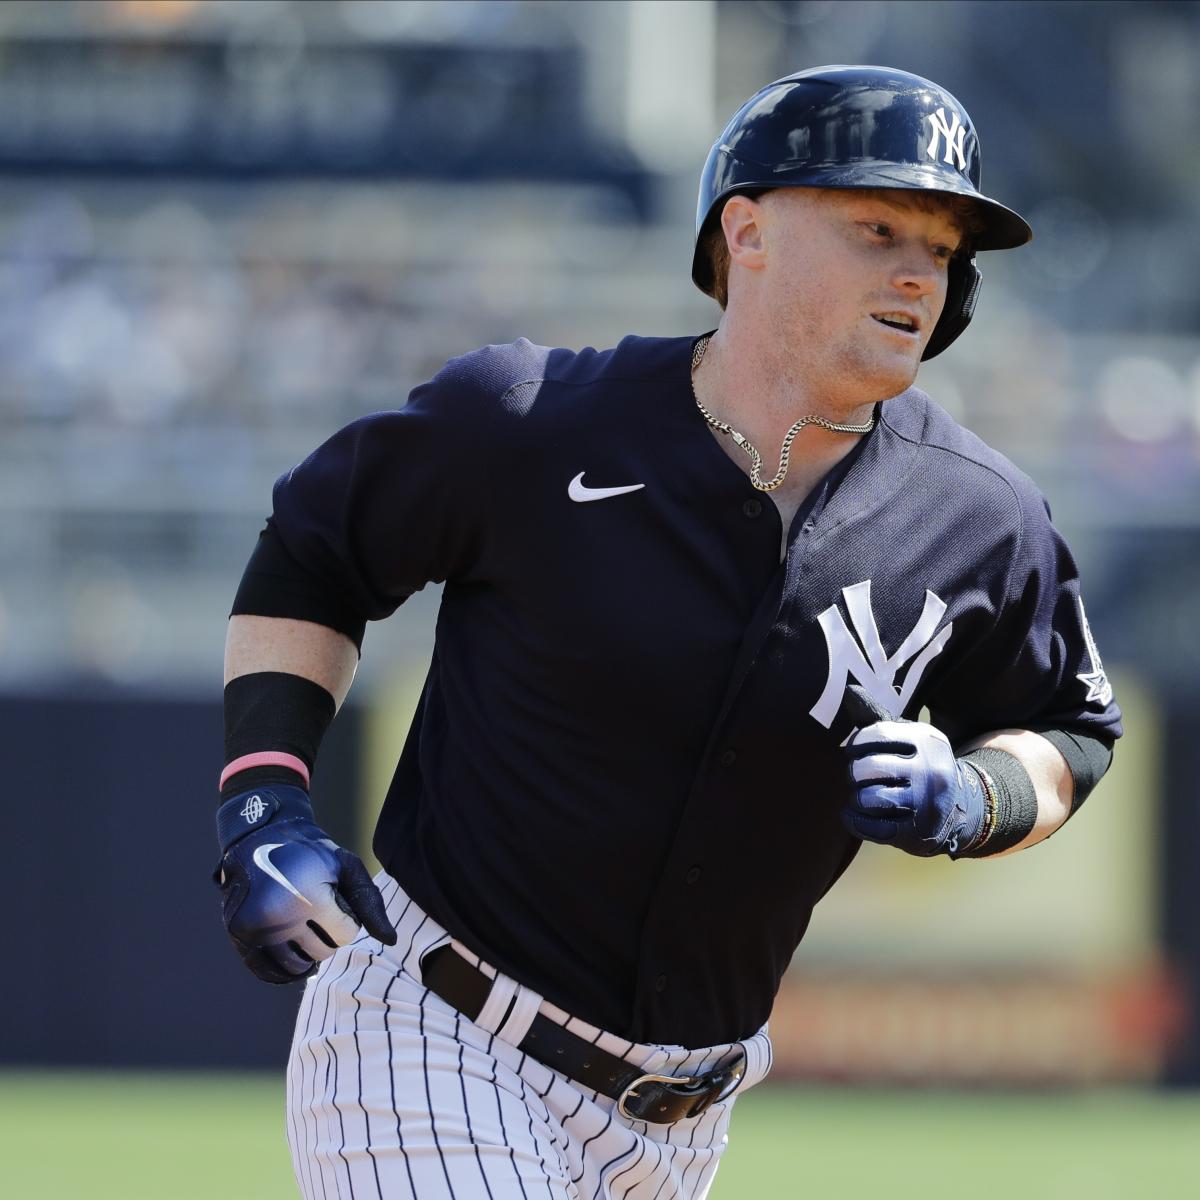 Future Yankees Star or Trade Bait? Forecasting Clint Frazier's MLB Future thumbnail